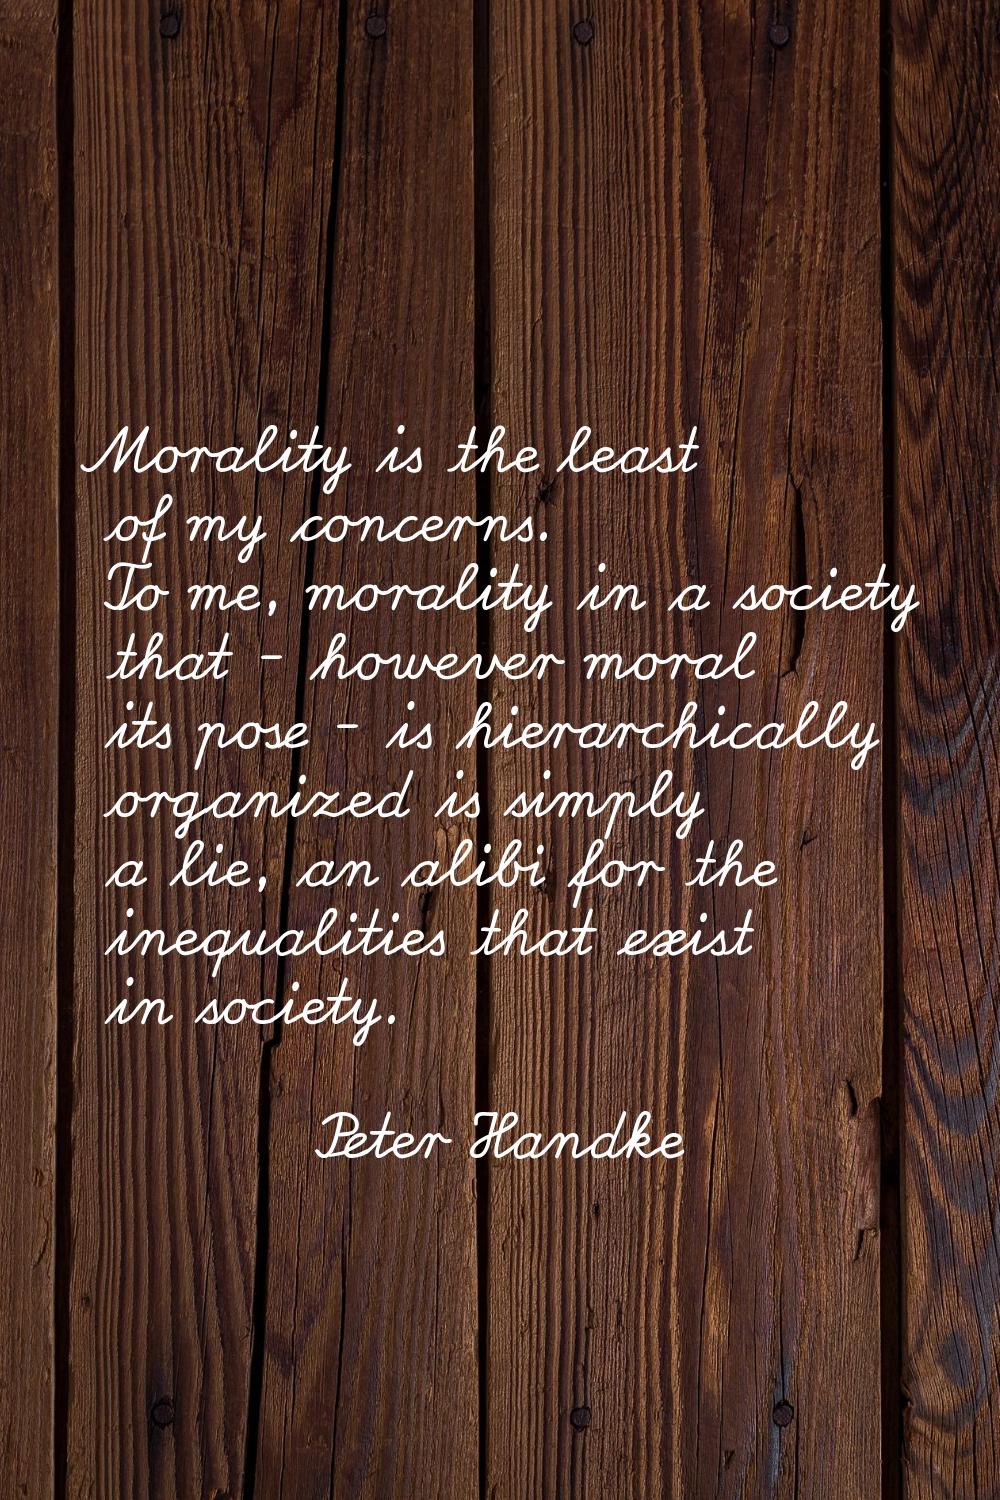 Morality is the least of my concerns. To me, morality in a society that - however moral its pose - 